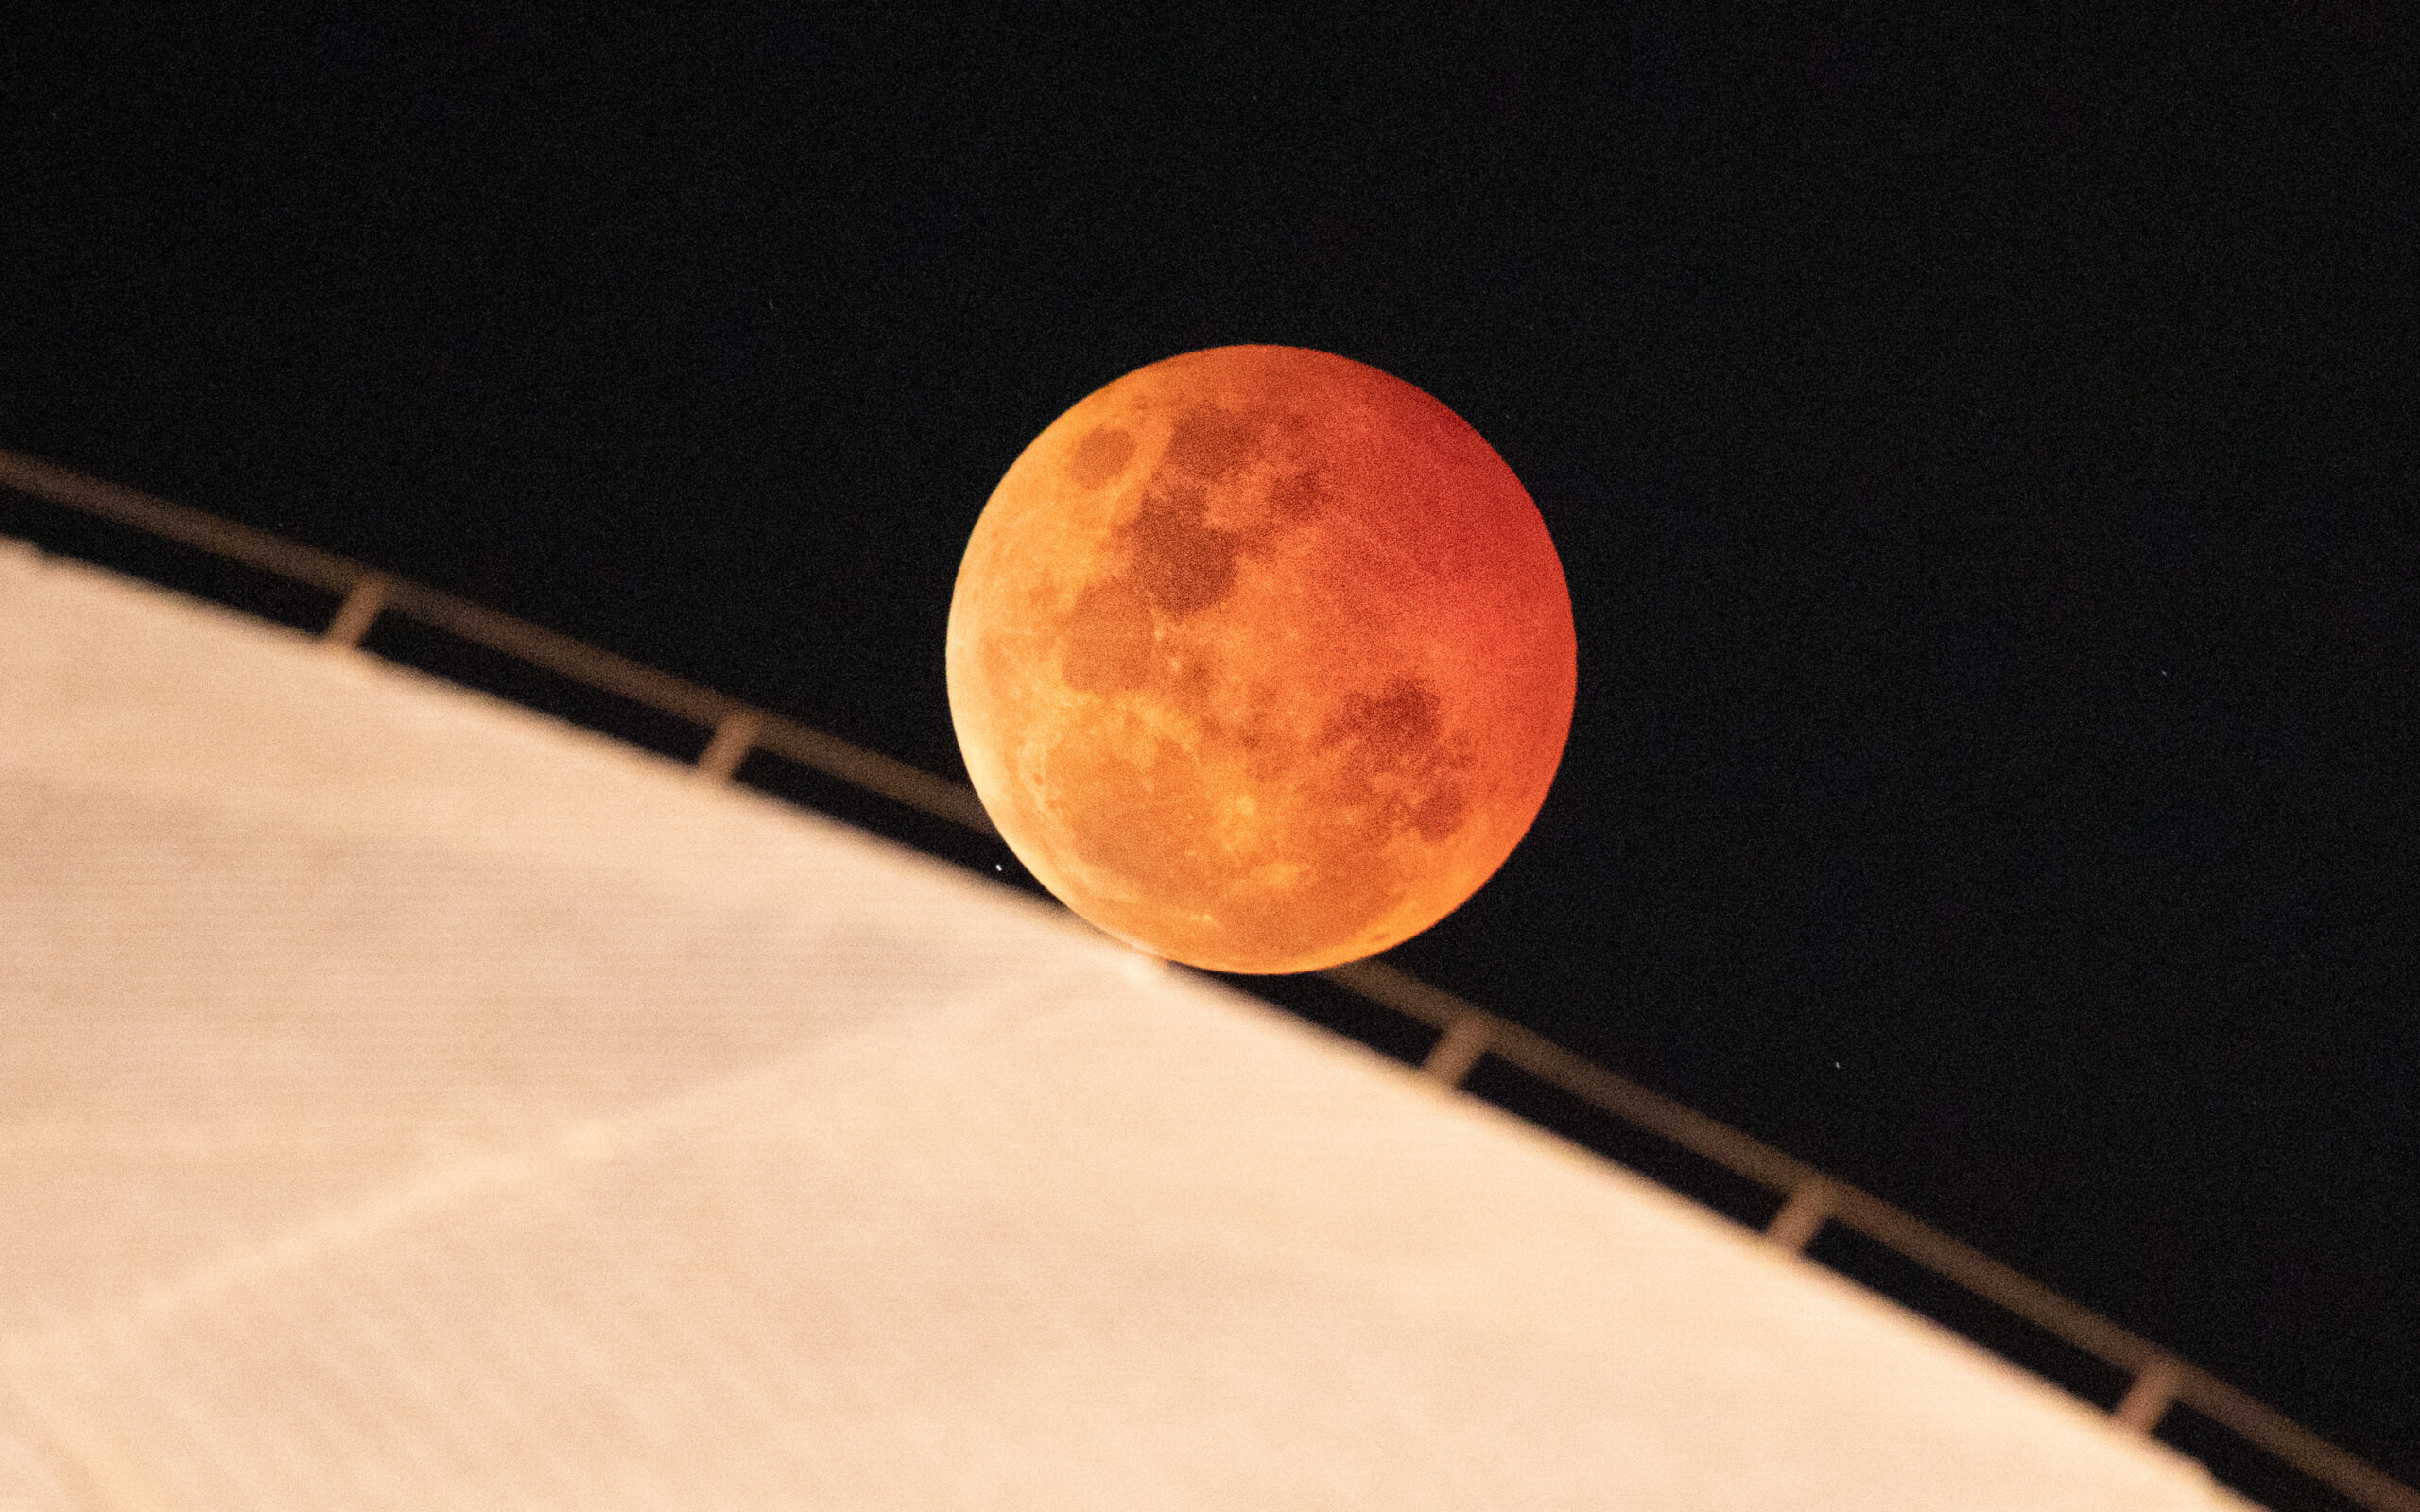 Lunar Eclipse above the Opera house